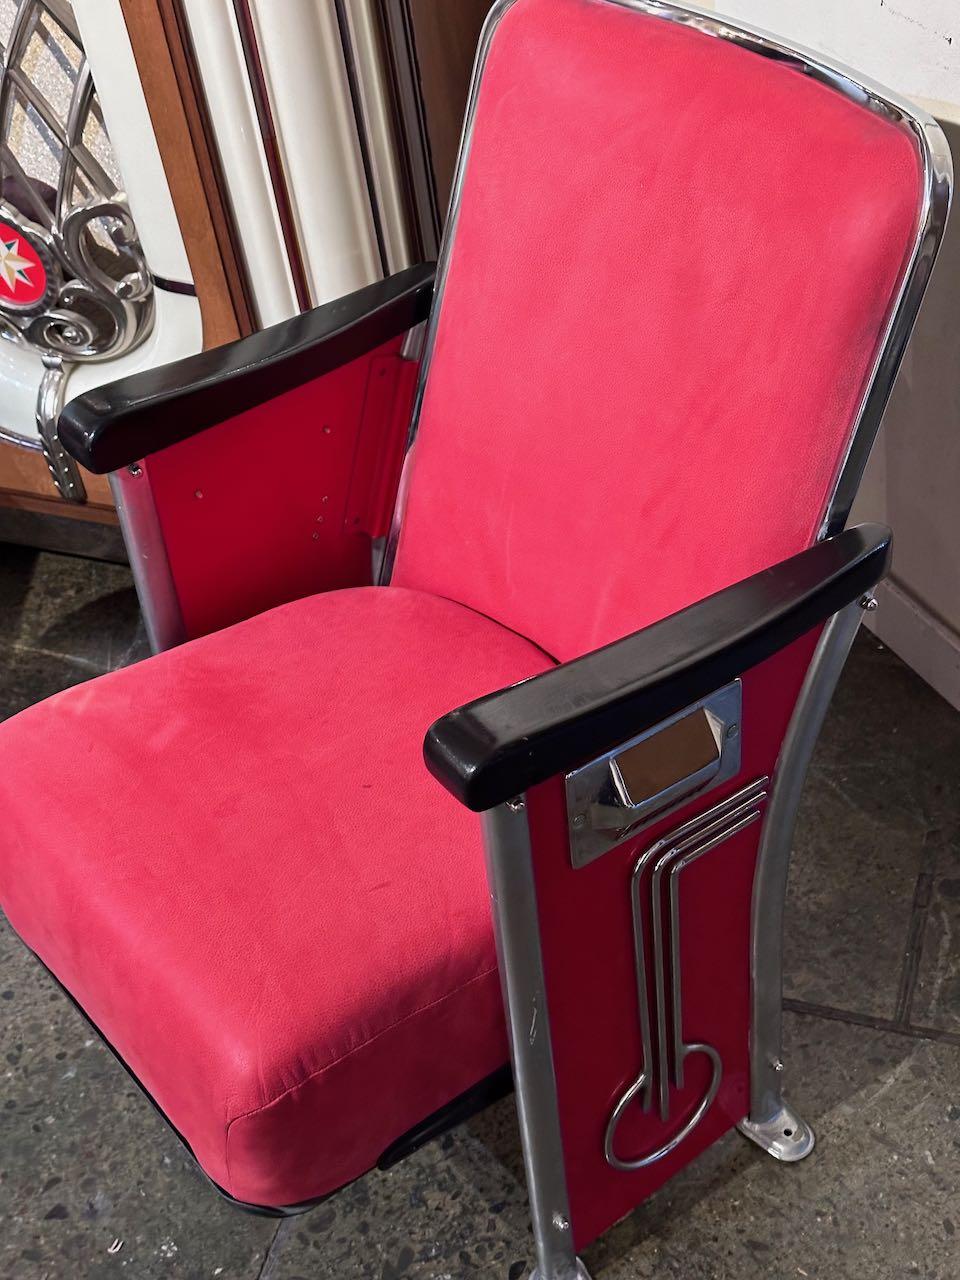 Mid-20th Century Restored Art Deco Movie Theater Seats Pair For Sale